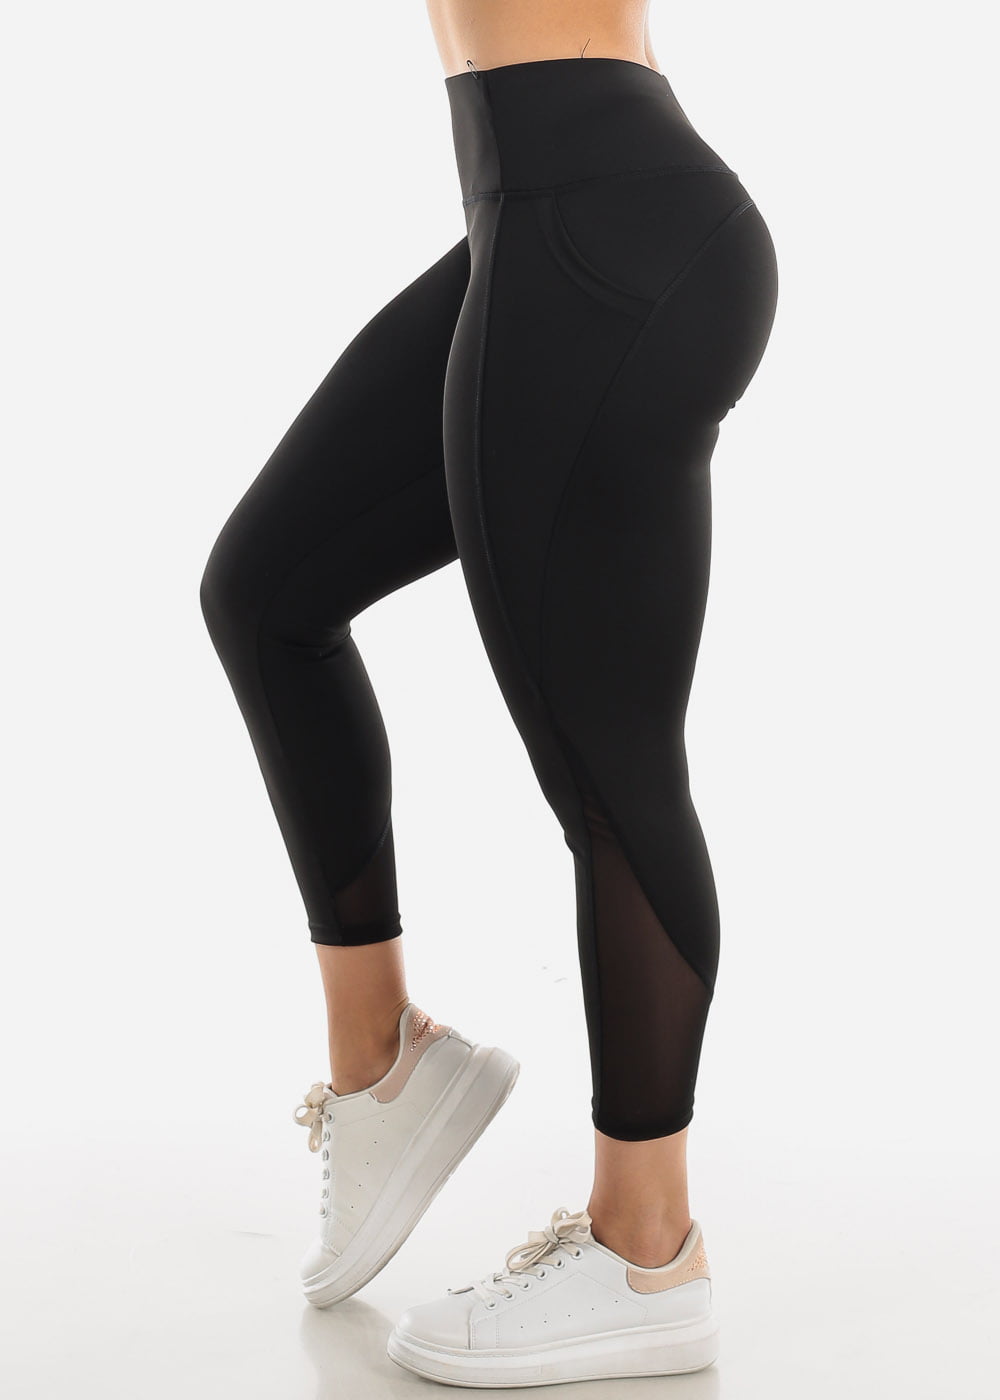 Best Fishnet workout leggings for Weight Loss